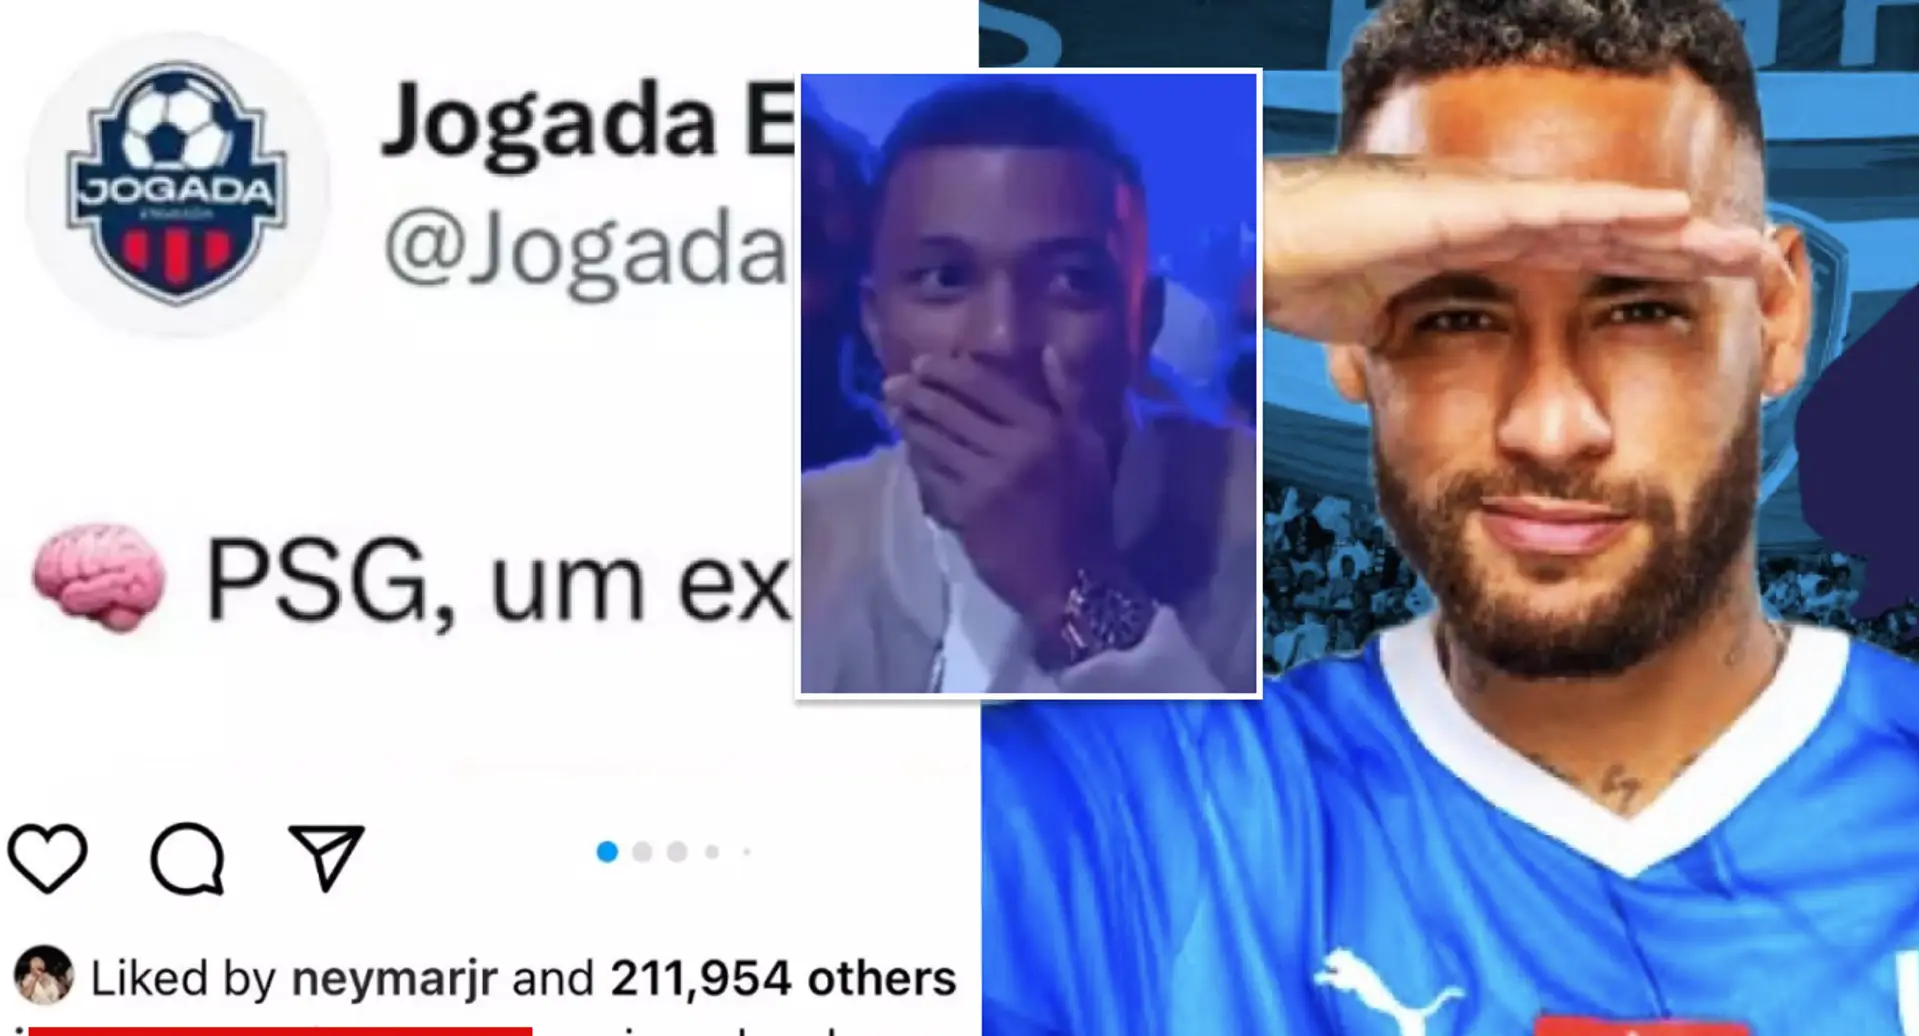 Neymar likes Insta post dissing PSG board – looks like a dig at Mbappe too